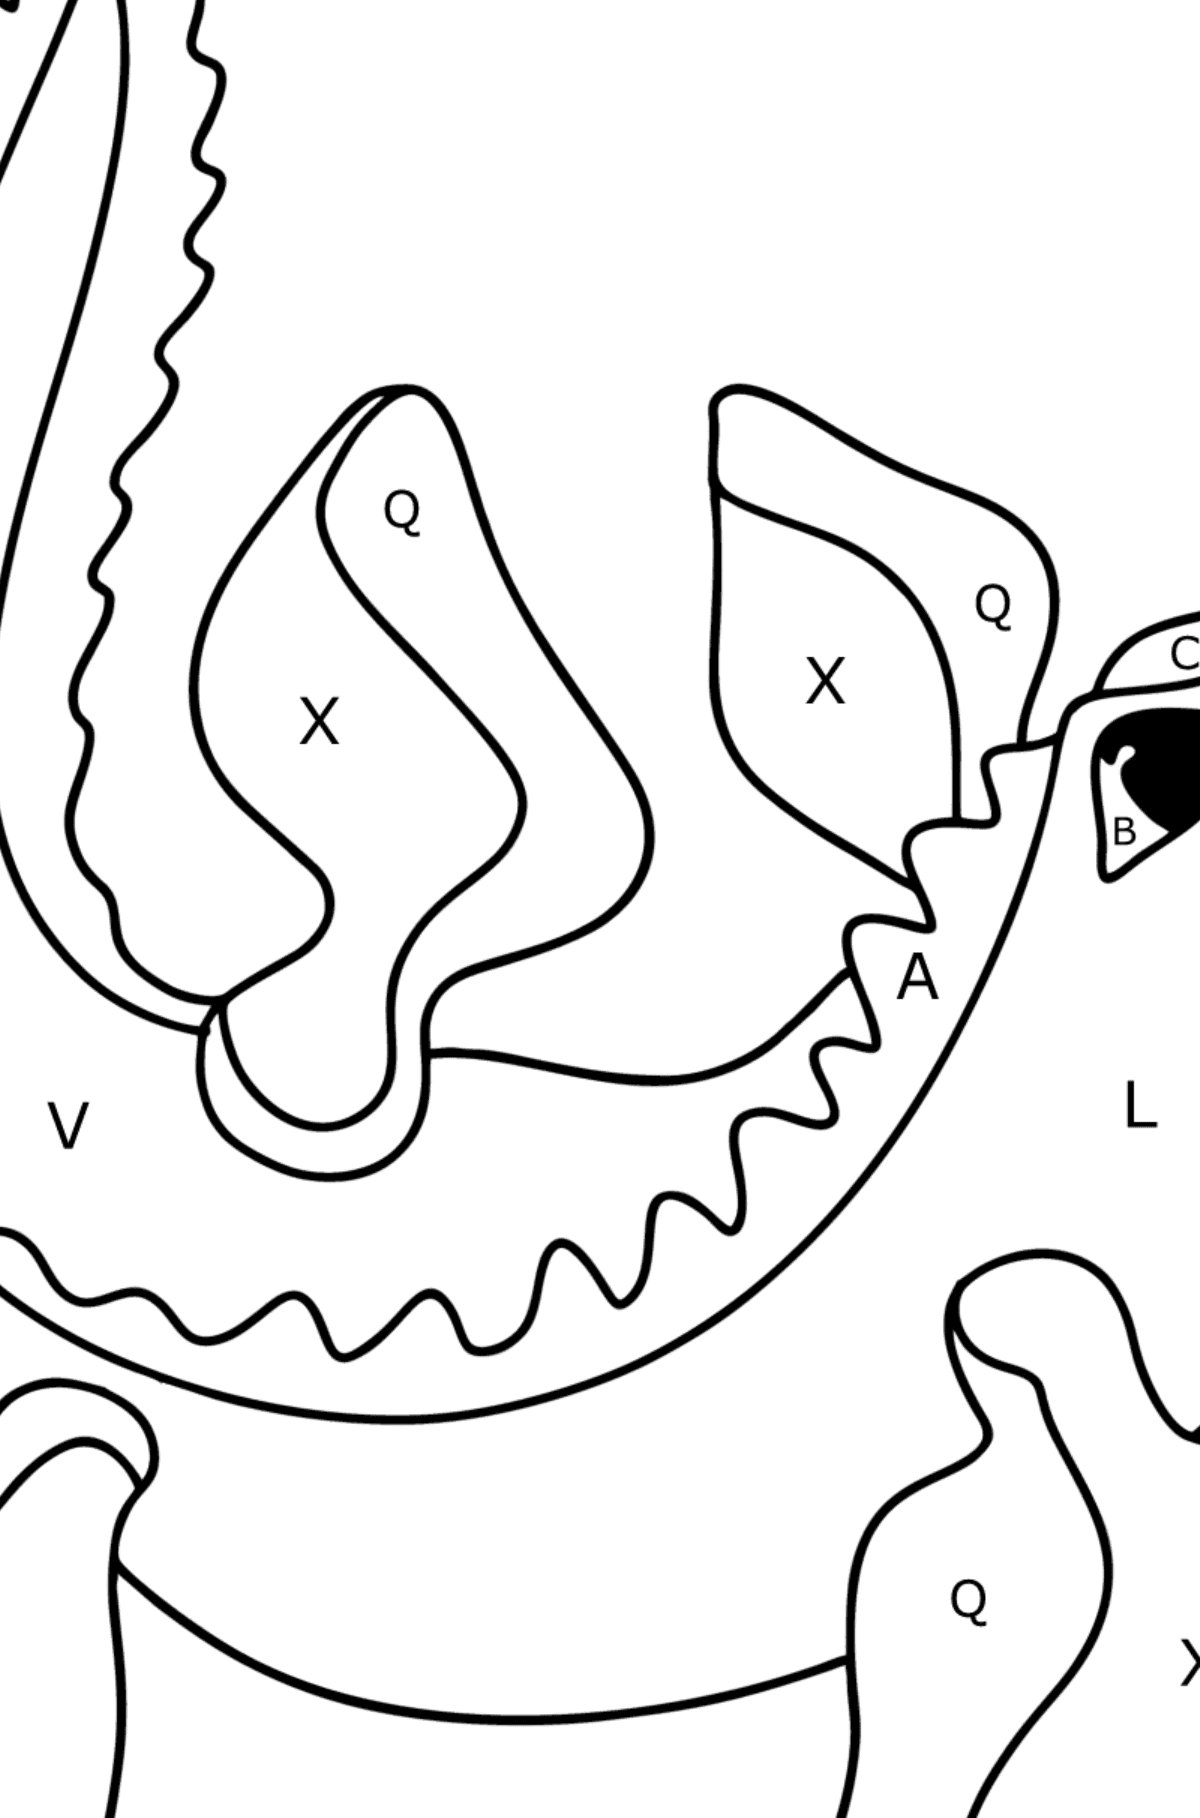 Mosasaurus coloring page - Coloring by Letters for Kids